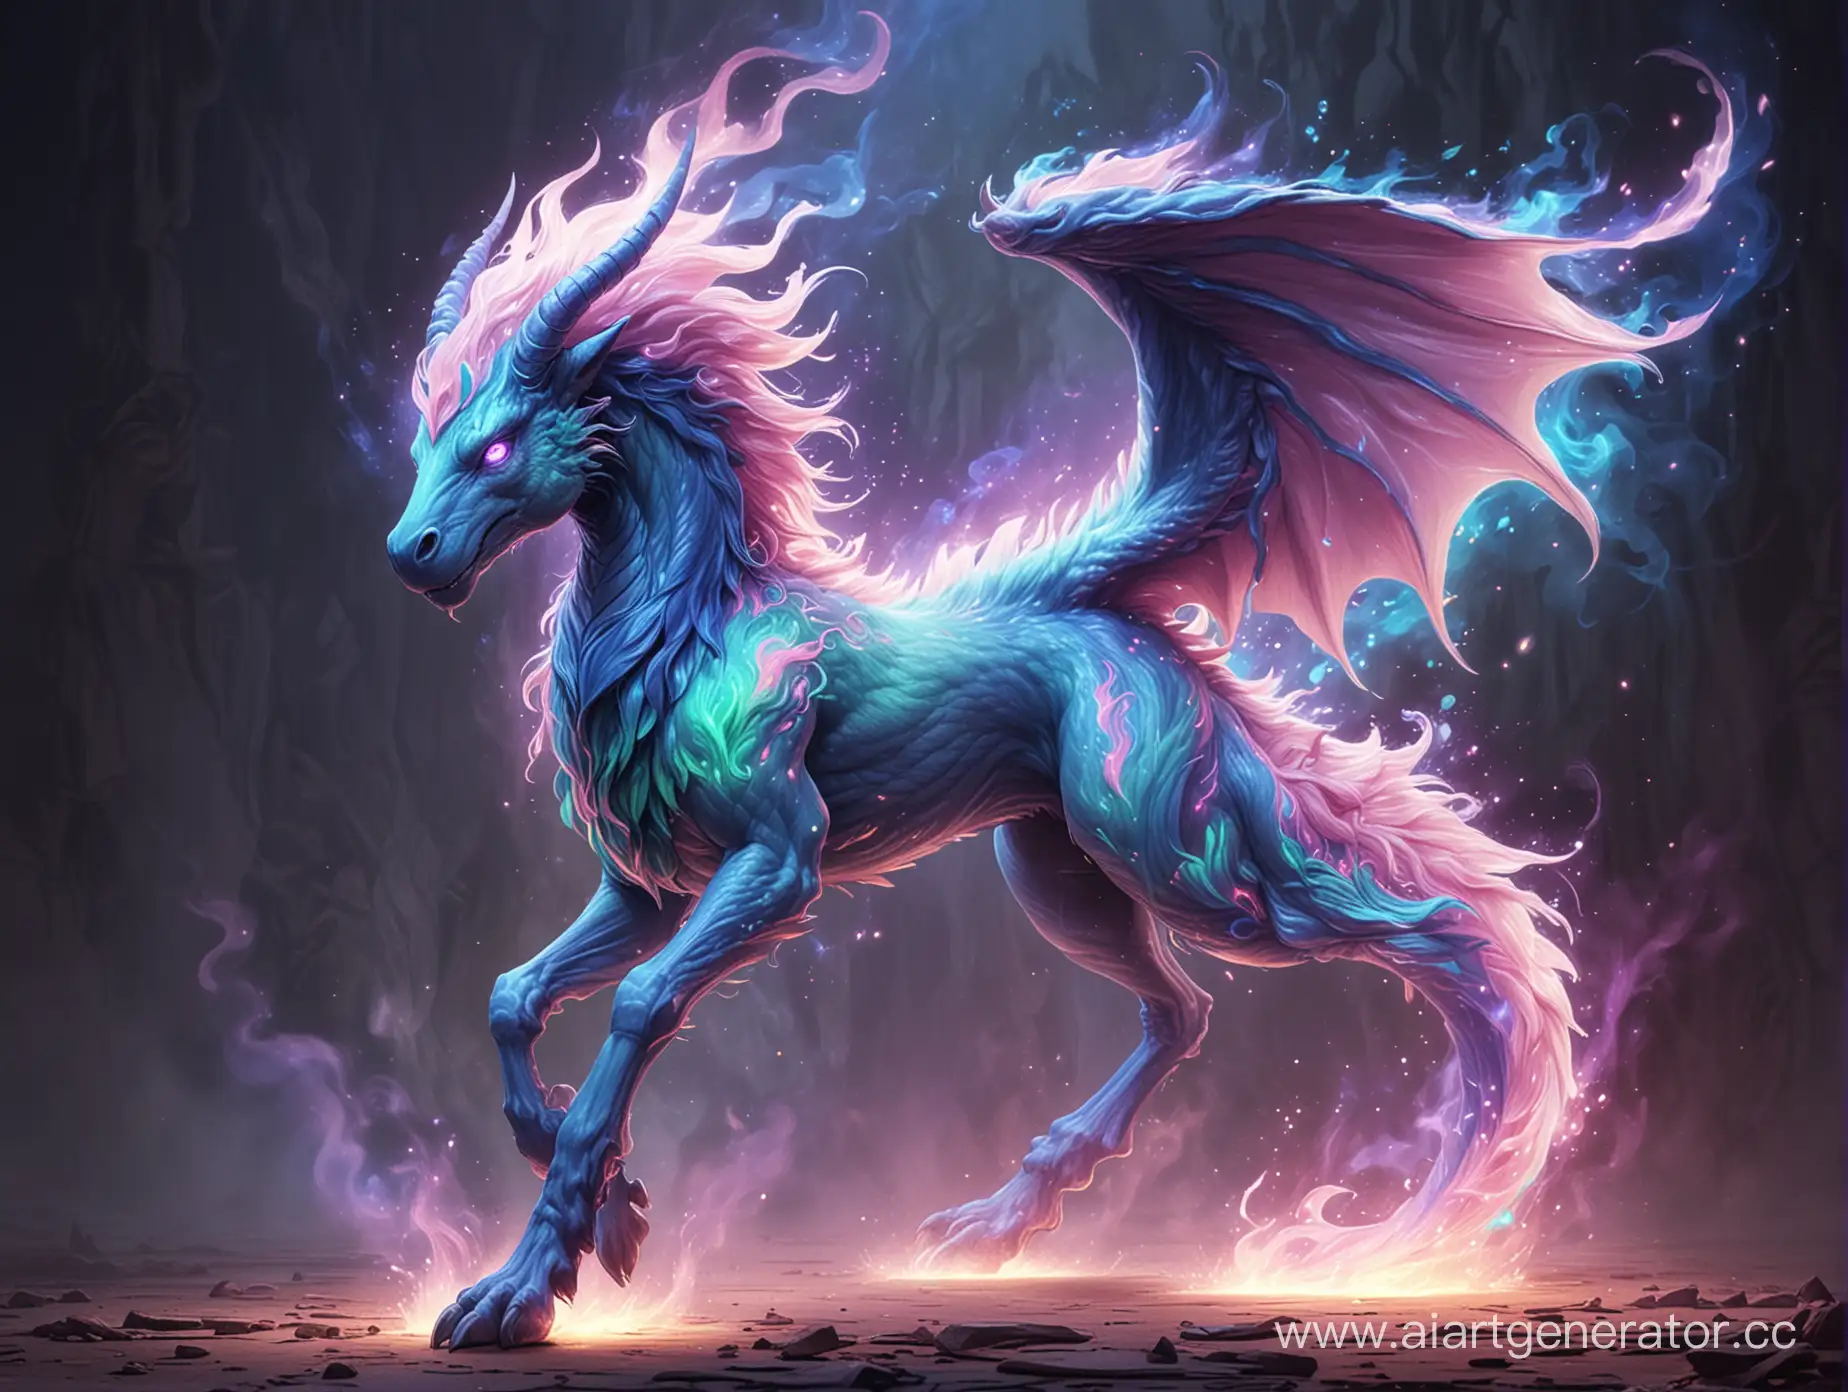 Enchanting-Pink-and-Blue-Mythical-Creature-with-Green-Flame